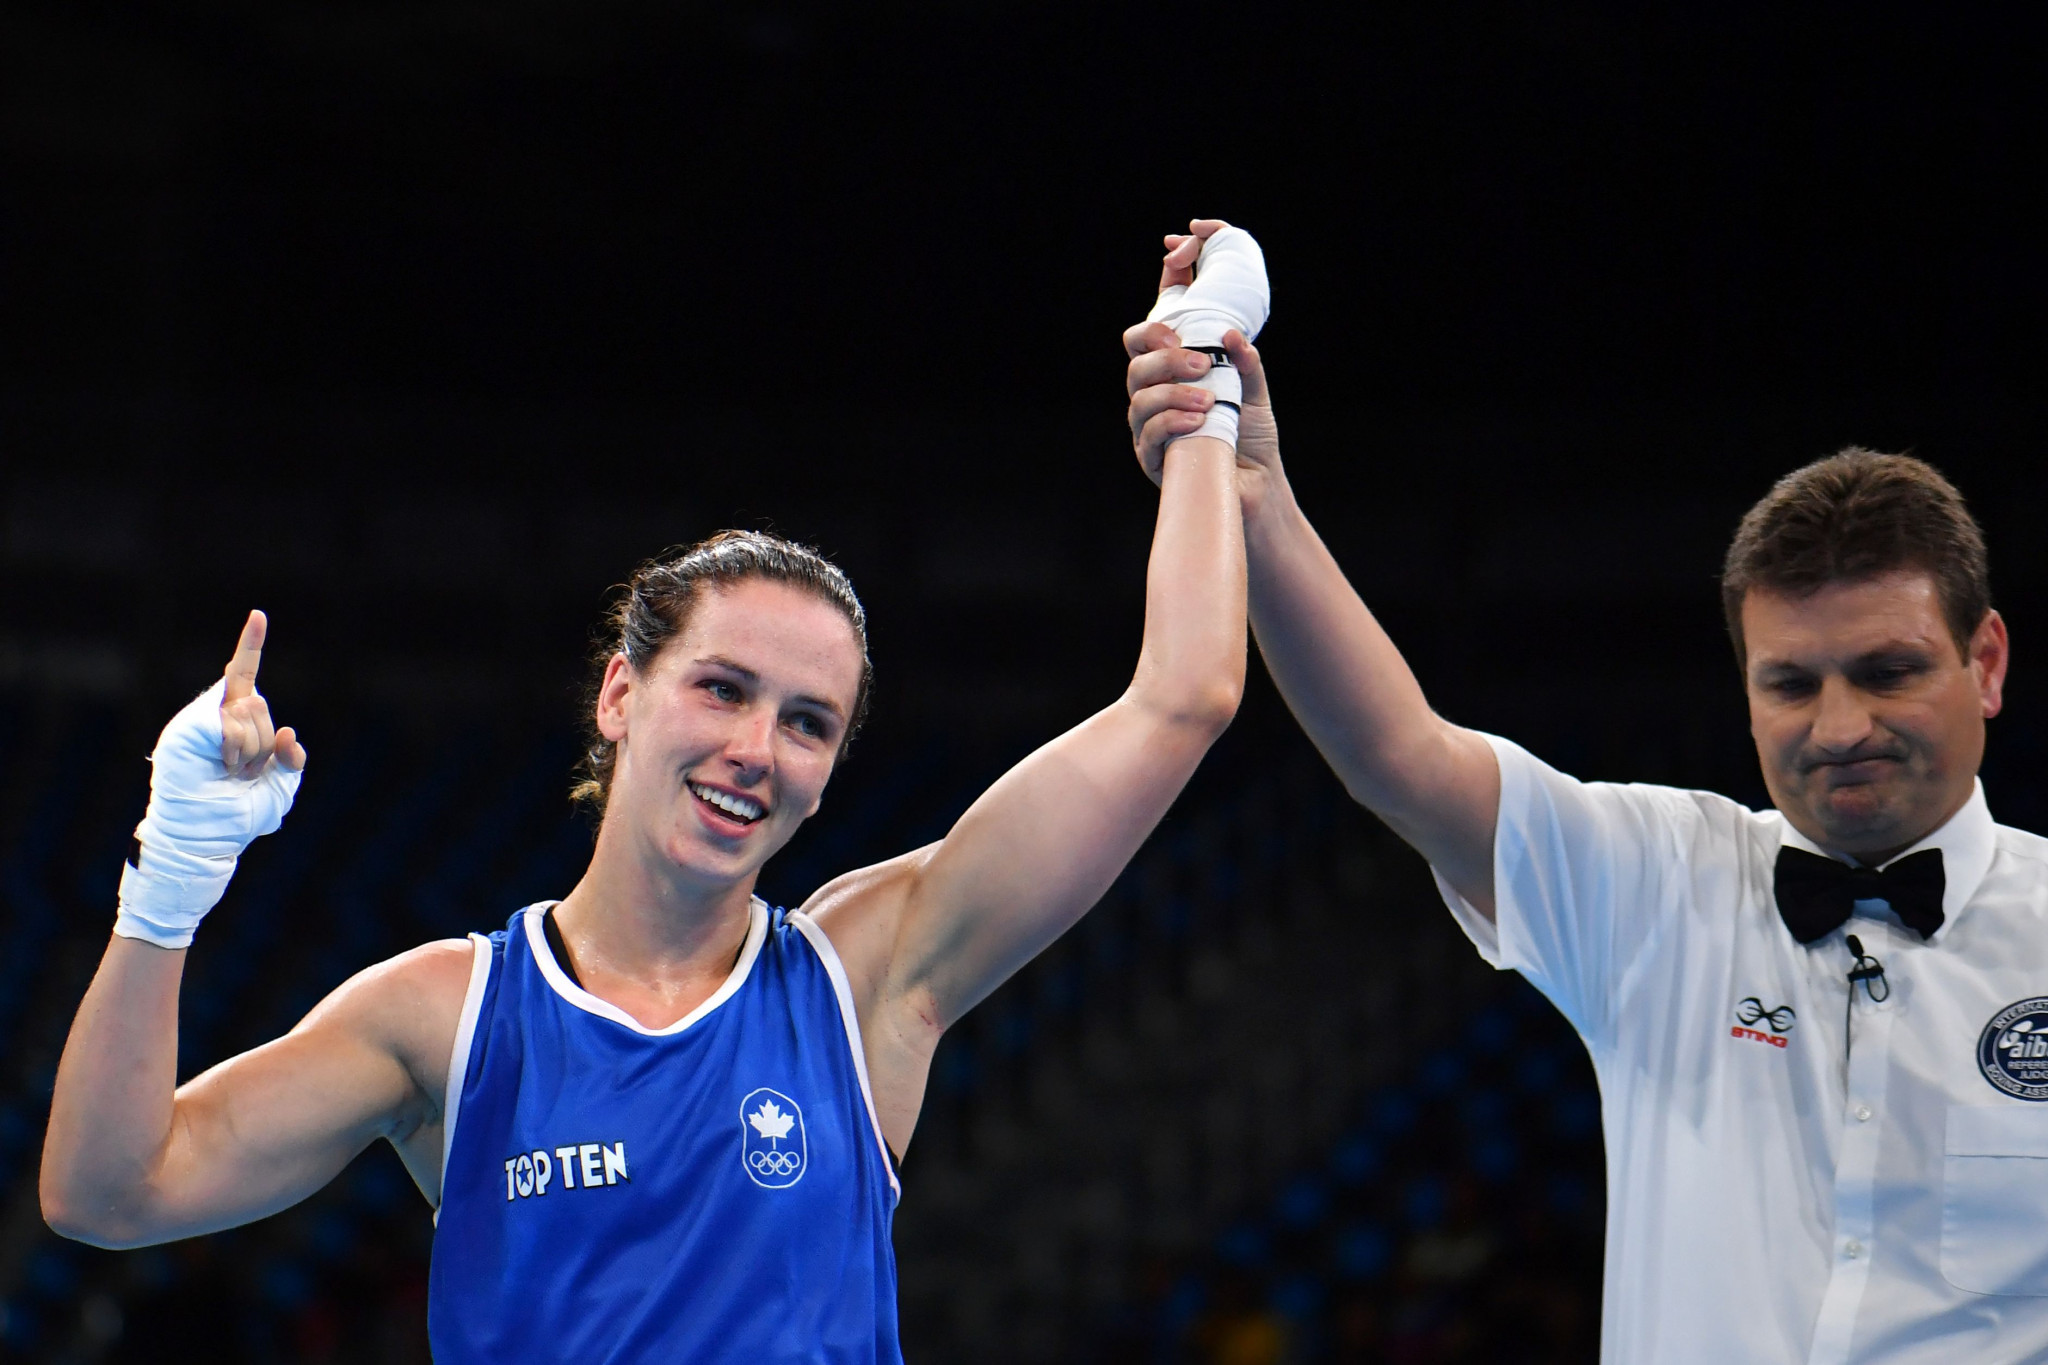 Bujold to challenge IOC decision after boxer denied Olympic berth